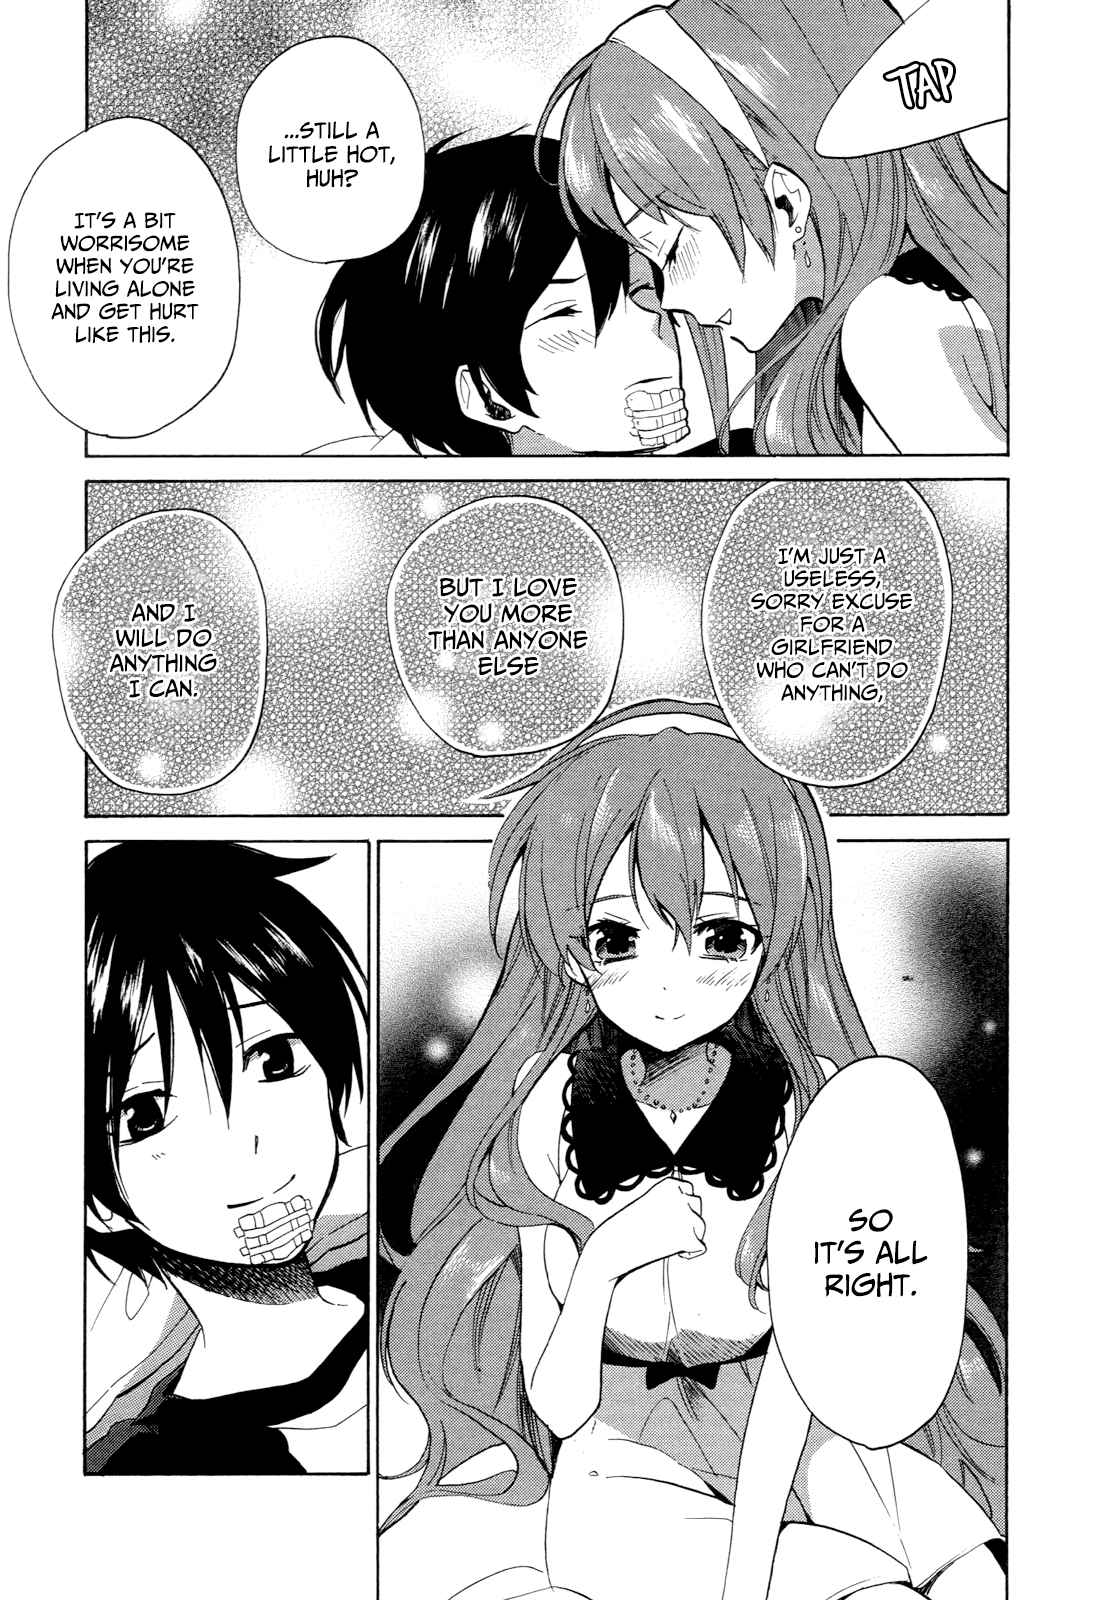 Golden Time Vol. 6 Ch. 30 "Oh~ I'm Tired~ I'm at my limits~" There's a spot for that, right~?